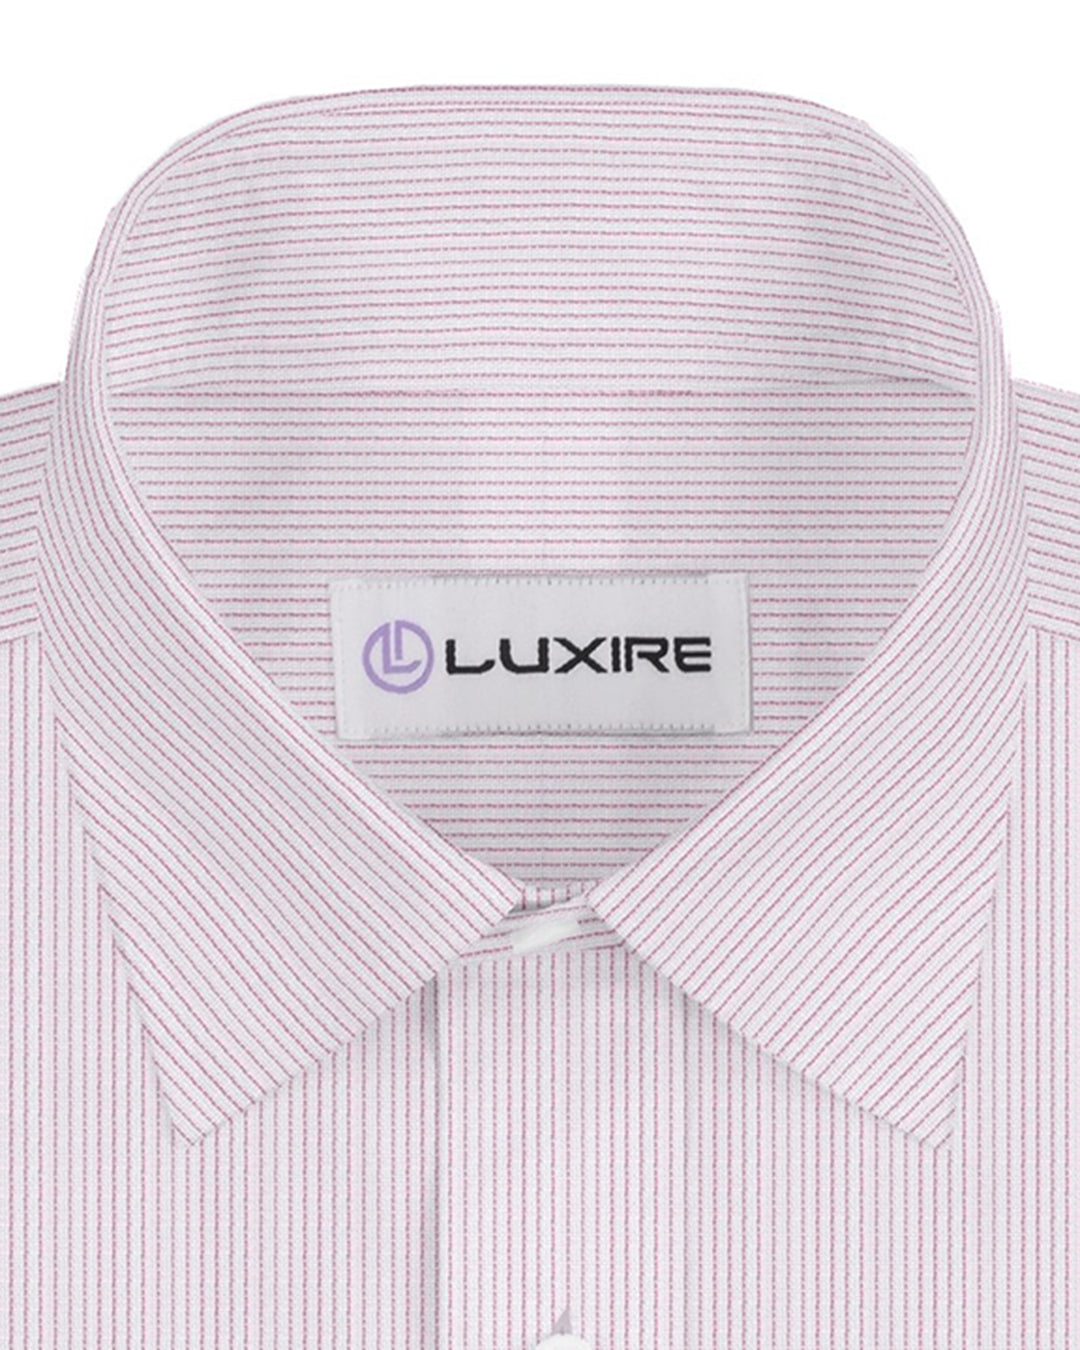 Collar of the custom linen shirt for men in white with light pink stripes by Luxire Clothing